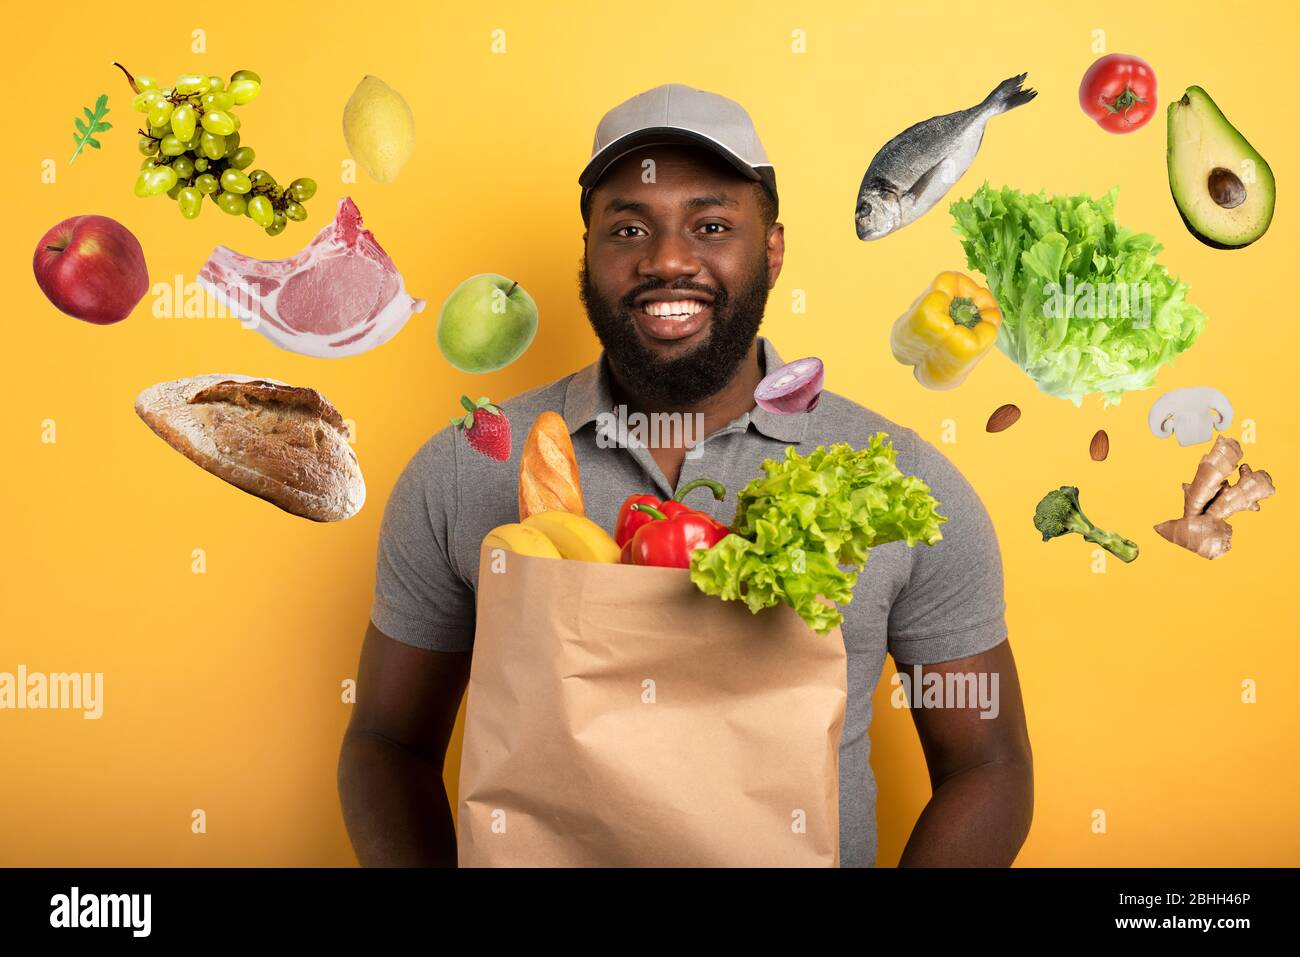 Deliveryman with happy expression ready to deliver bag with food. Yellow background. Stock Photo